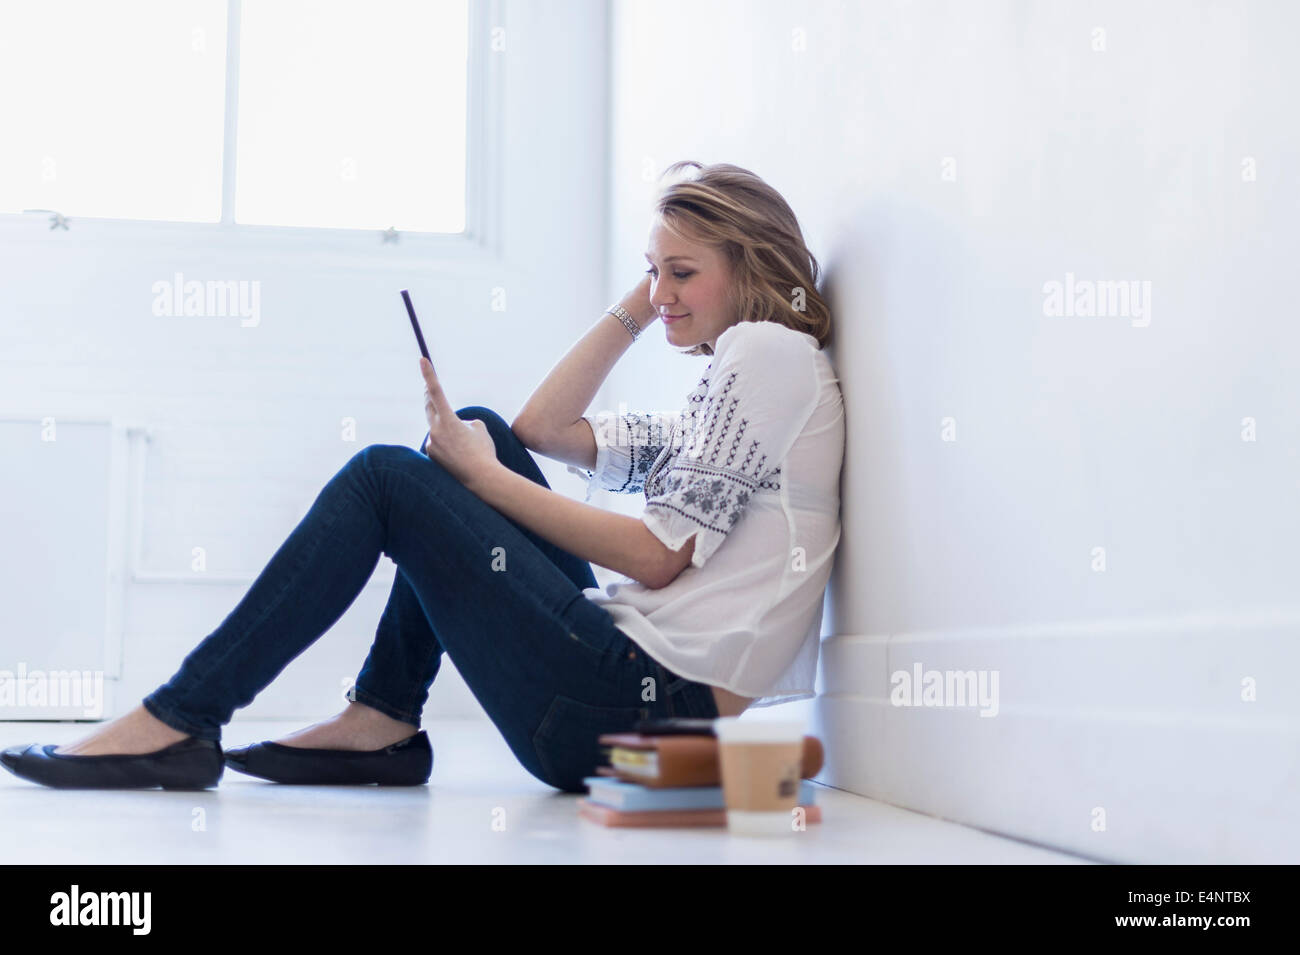 Young woman sitting on floor and using digital tablet Banque D'Images